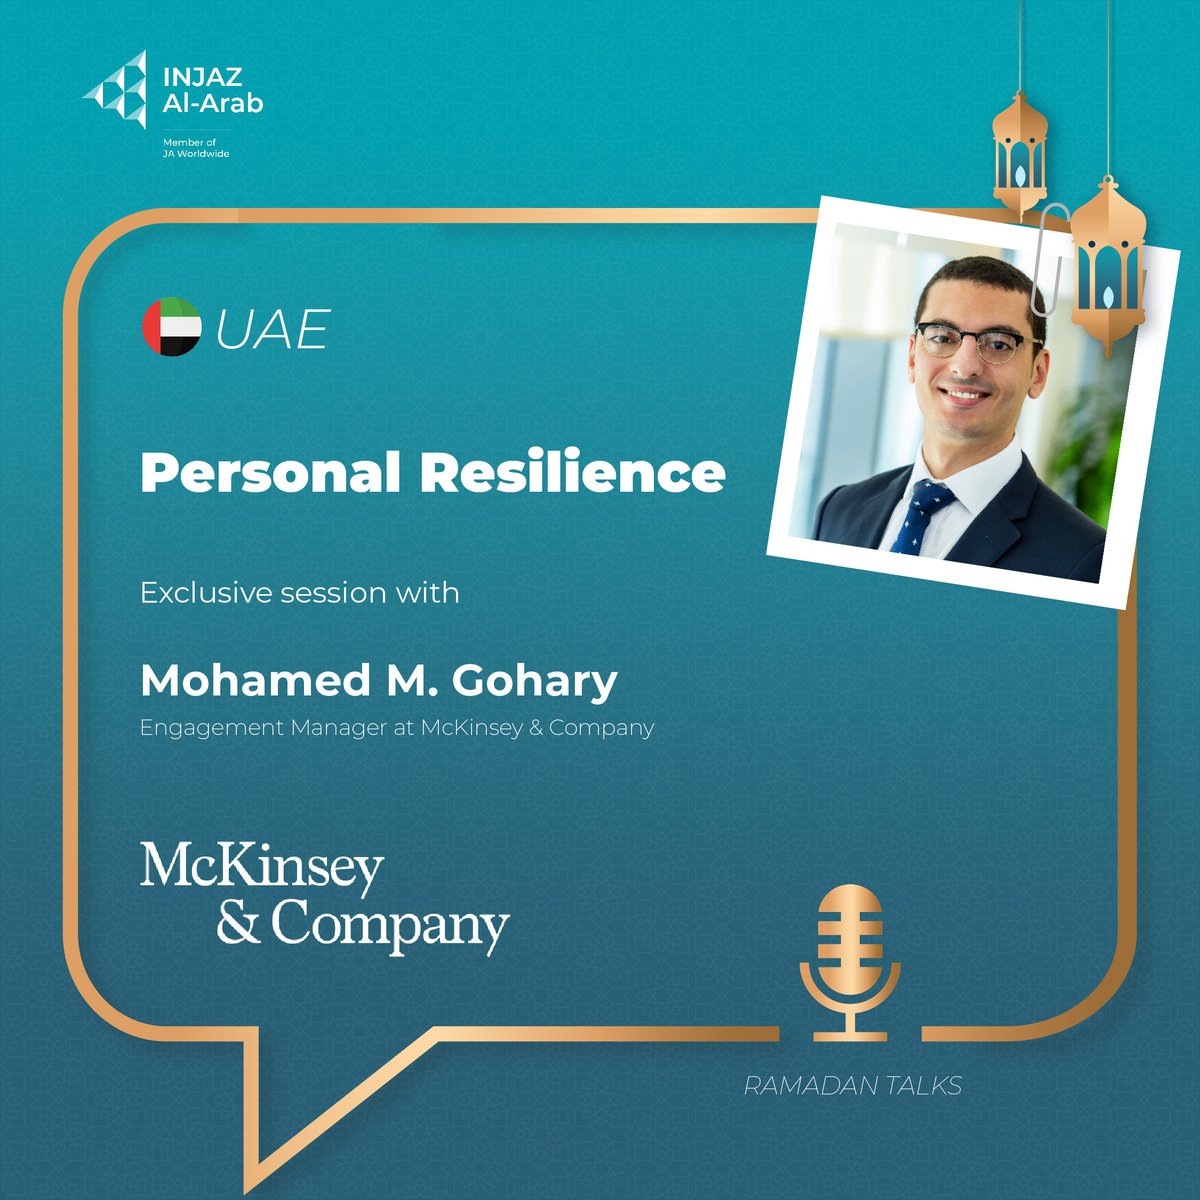 Meet McKinsey's experts who led “Ramadan Talks” sessions in UAE and inspired students with their experience and advice. @mckinsey_middleeast